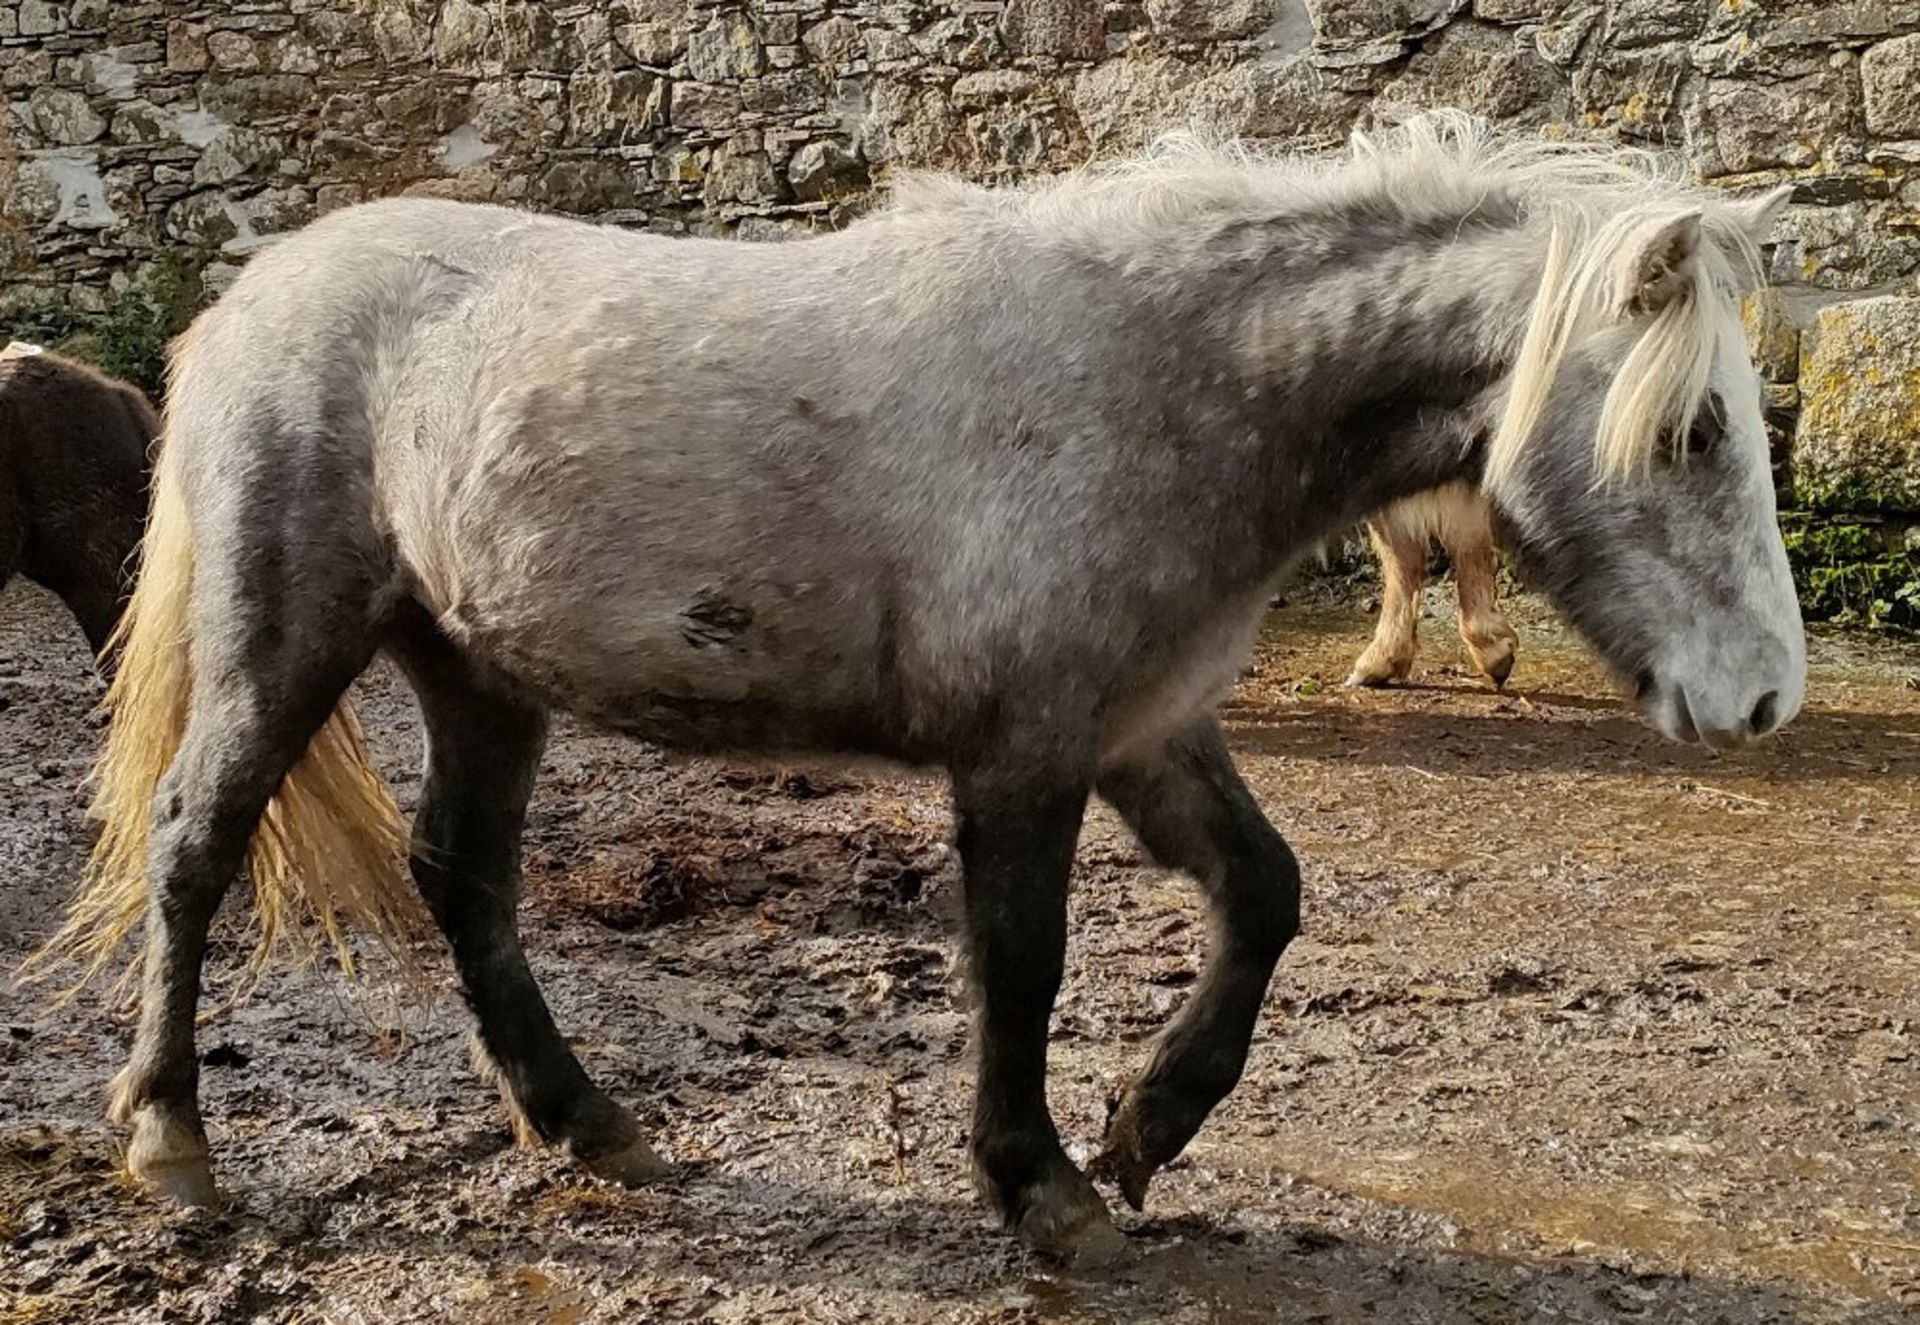 'GODSWORTHY' DARTMOOR HILL PONY GREY FILLY APPROX 18 MONTHS OLD - Image 3 of 10